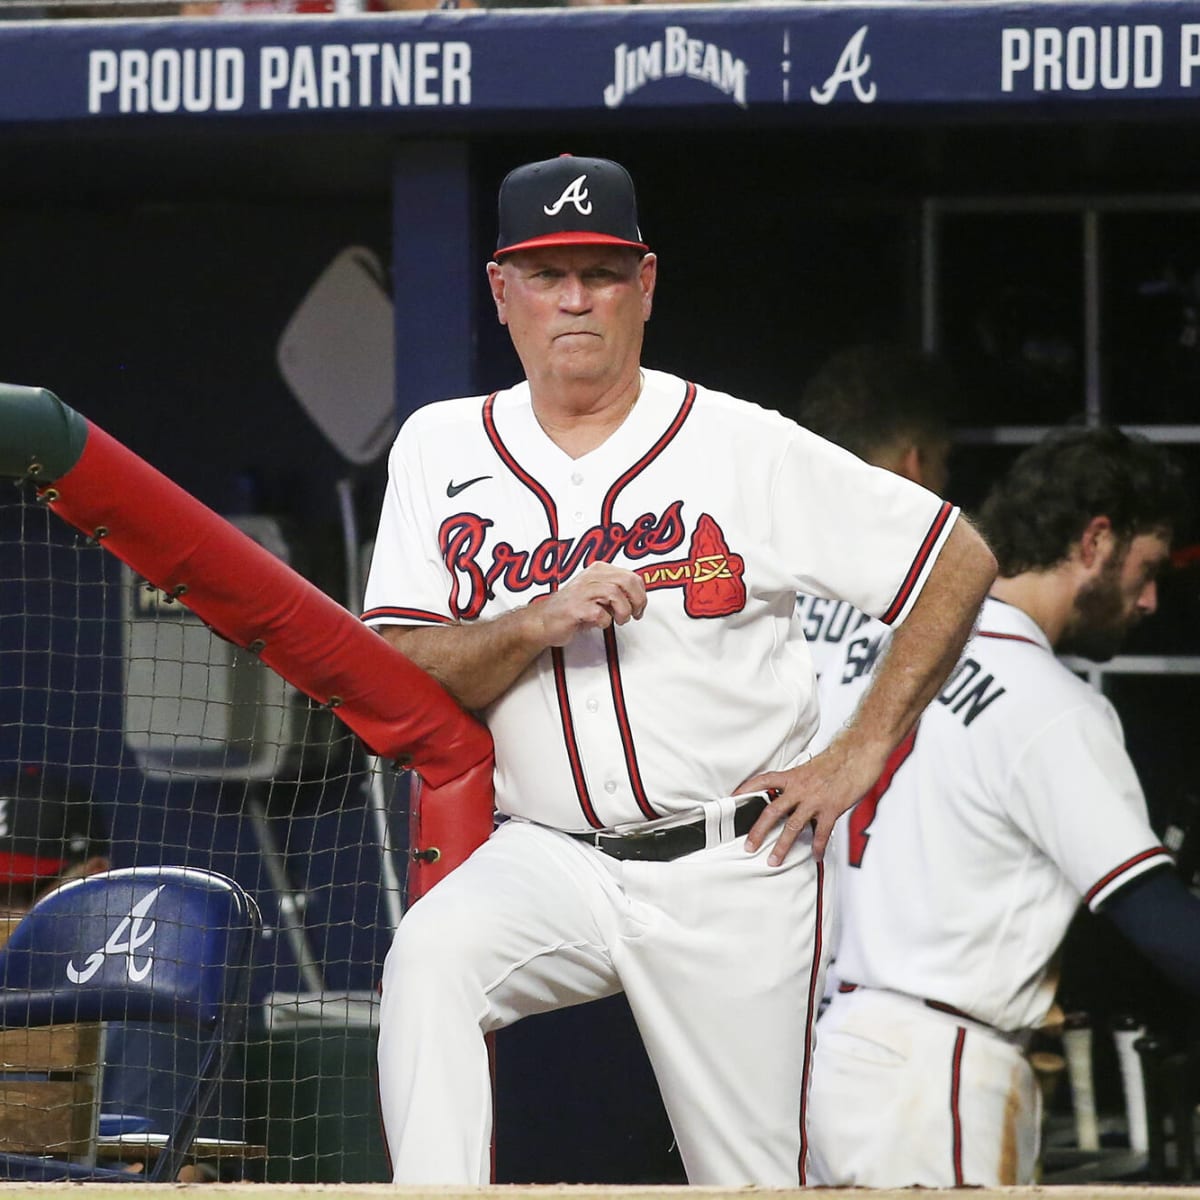 Braves sign manager Brian Snitker to multiyear extension through